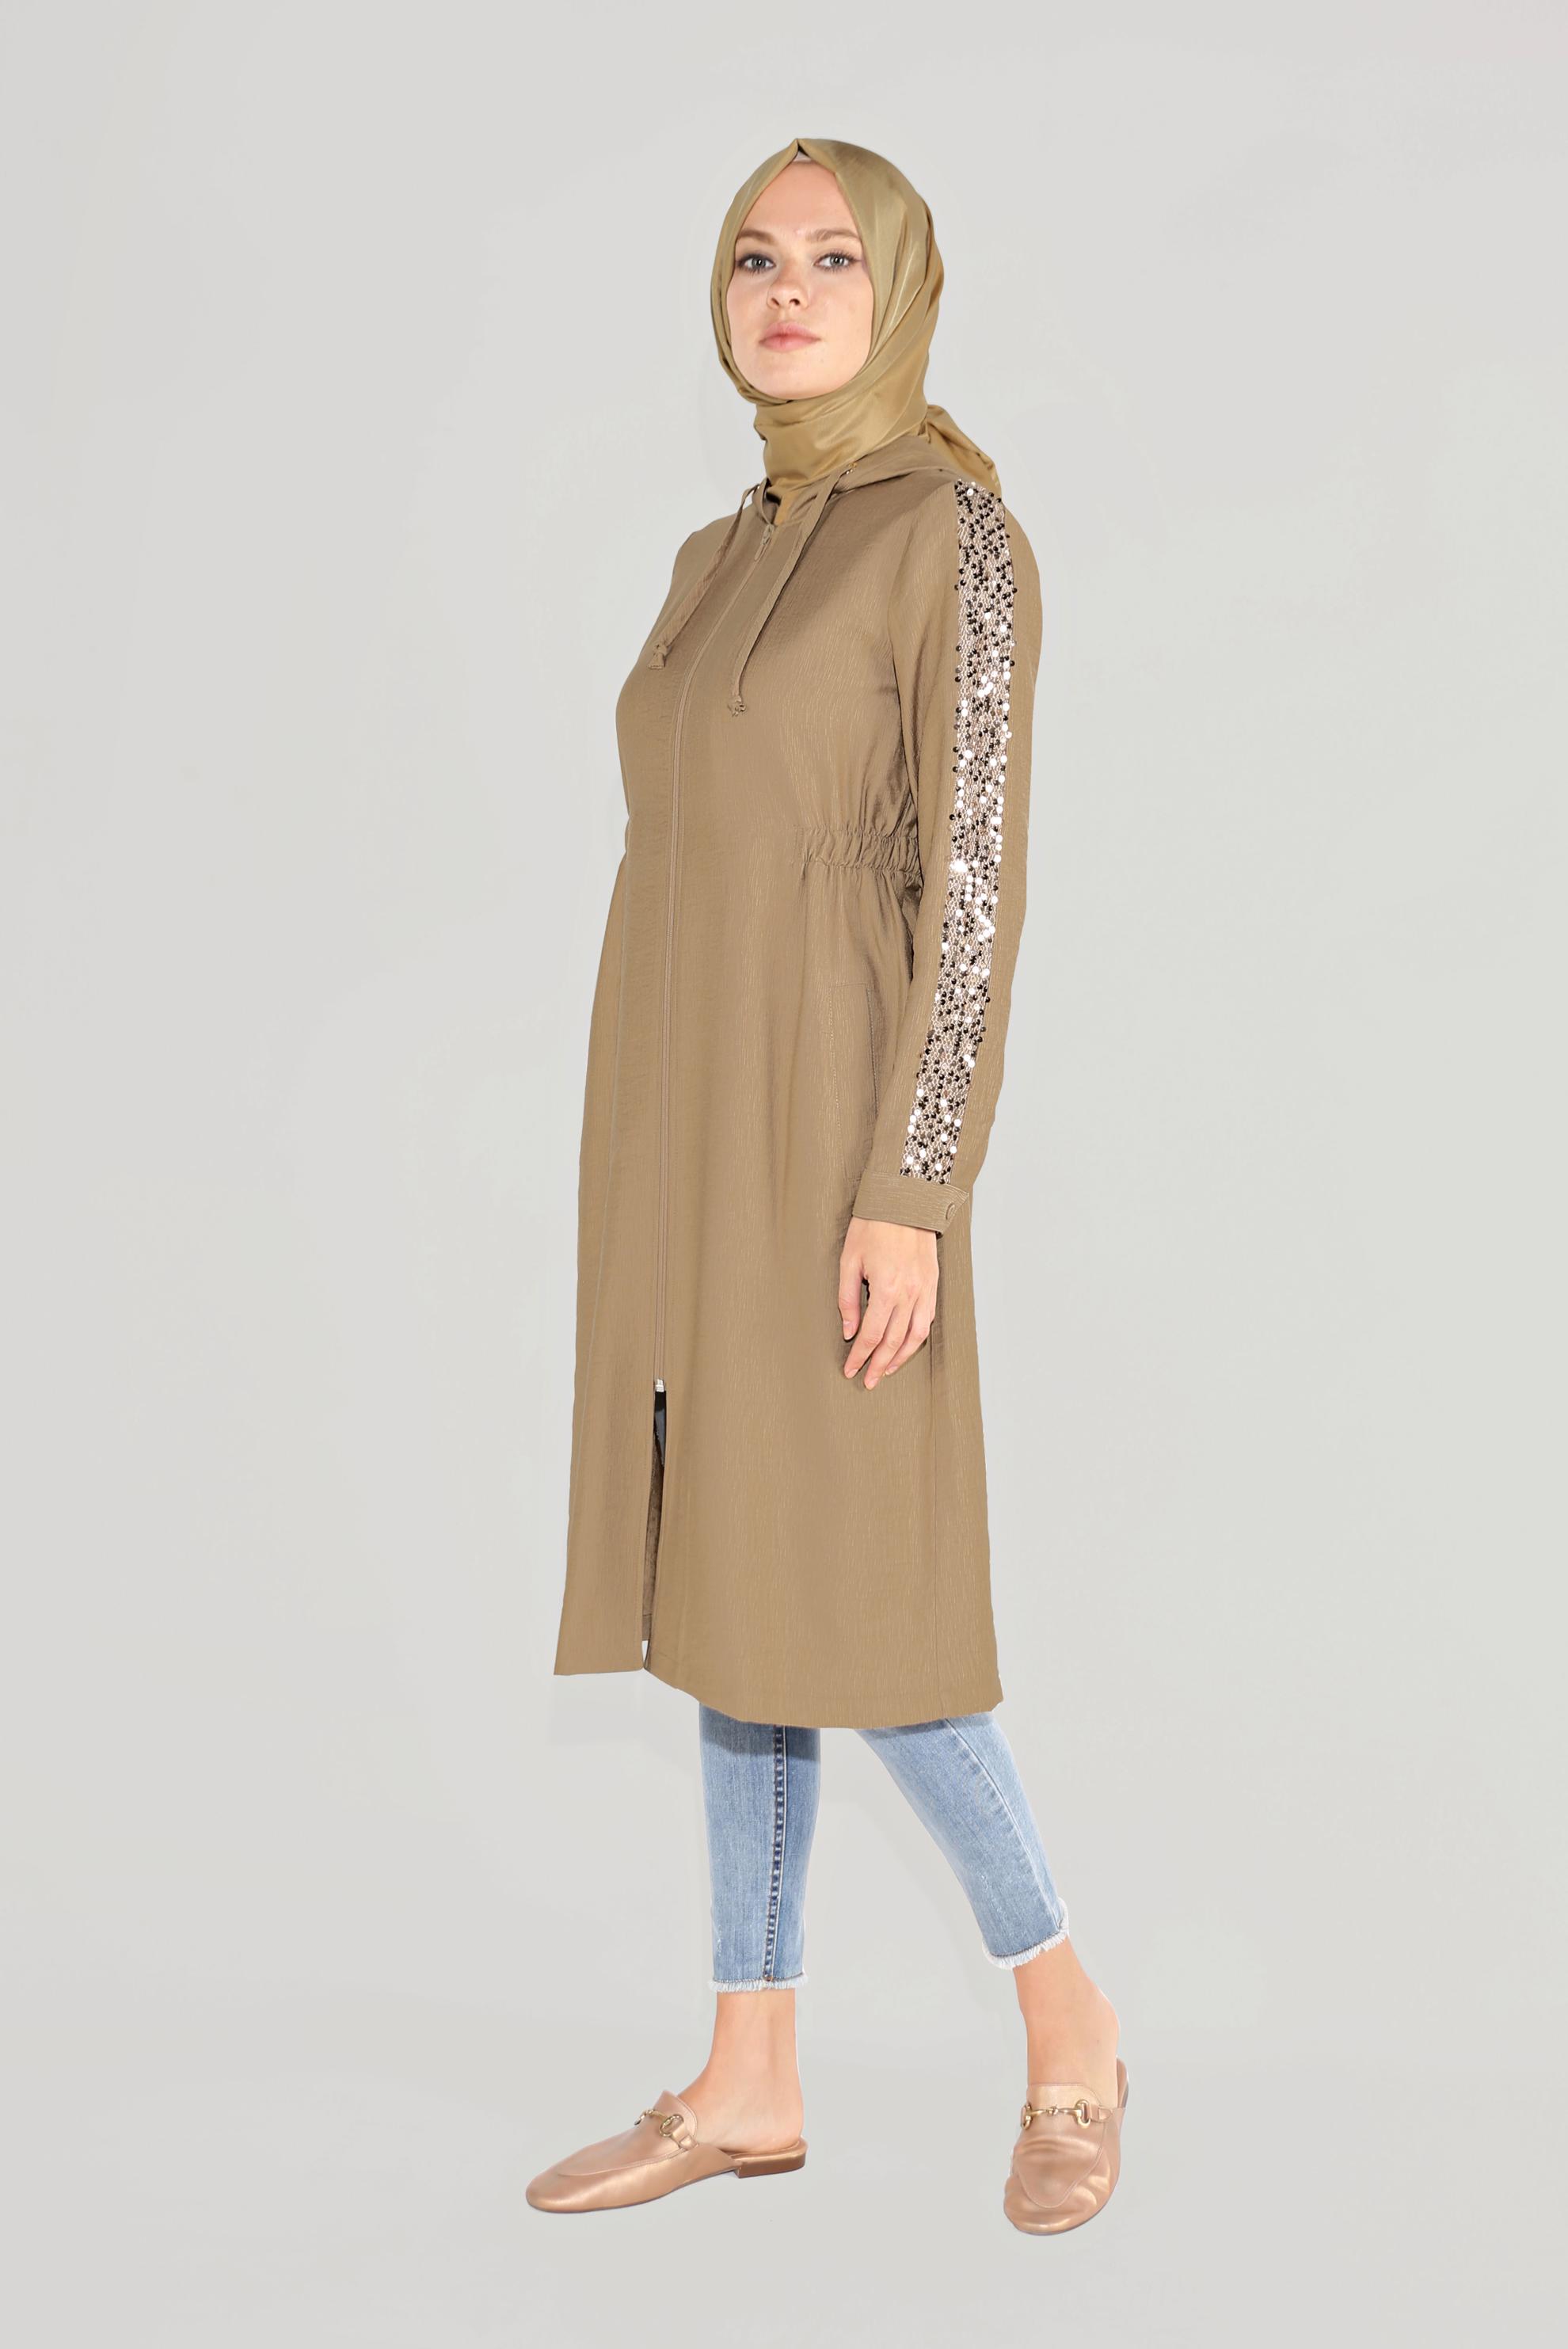 HOODED TUNIC SEQUINS ON ARM WOMEN HIJAB